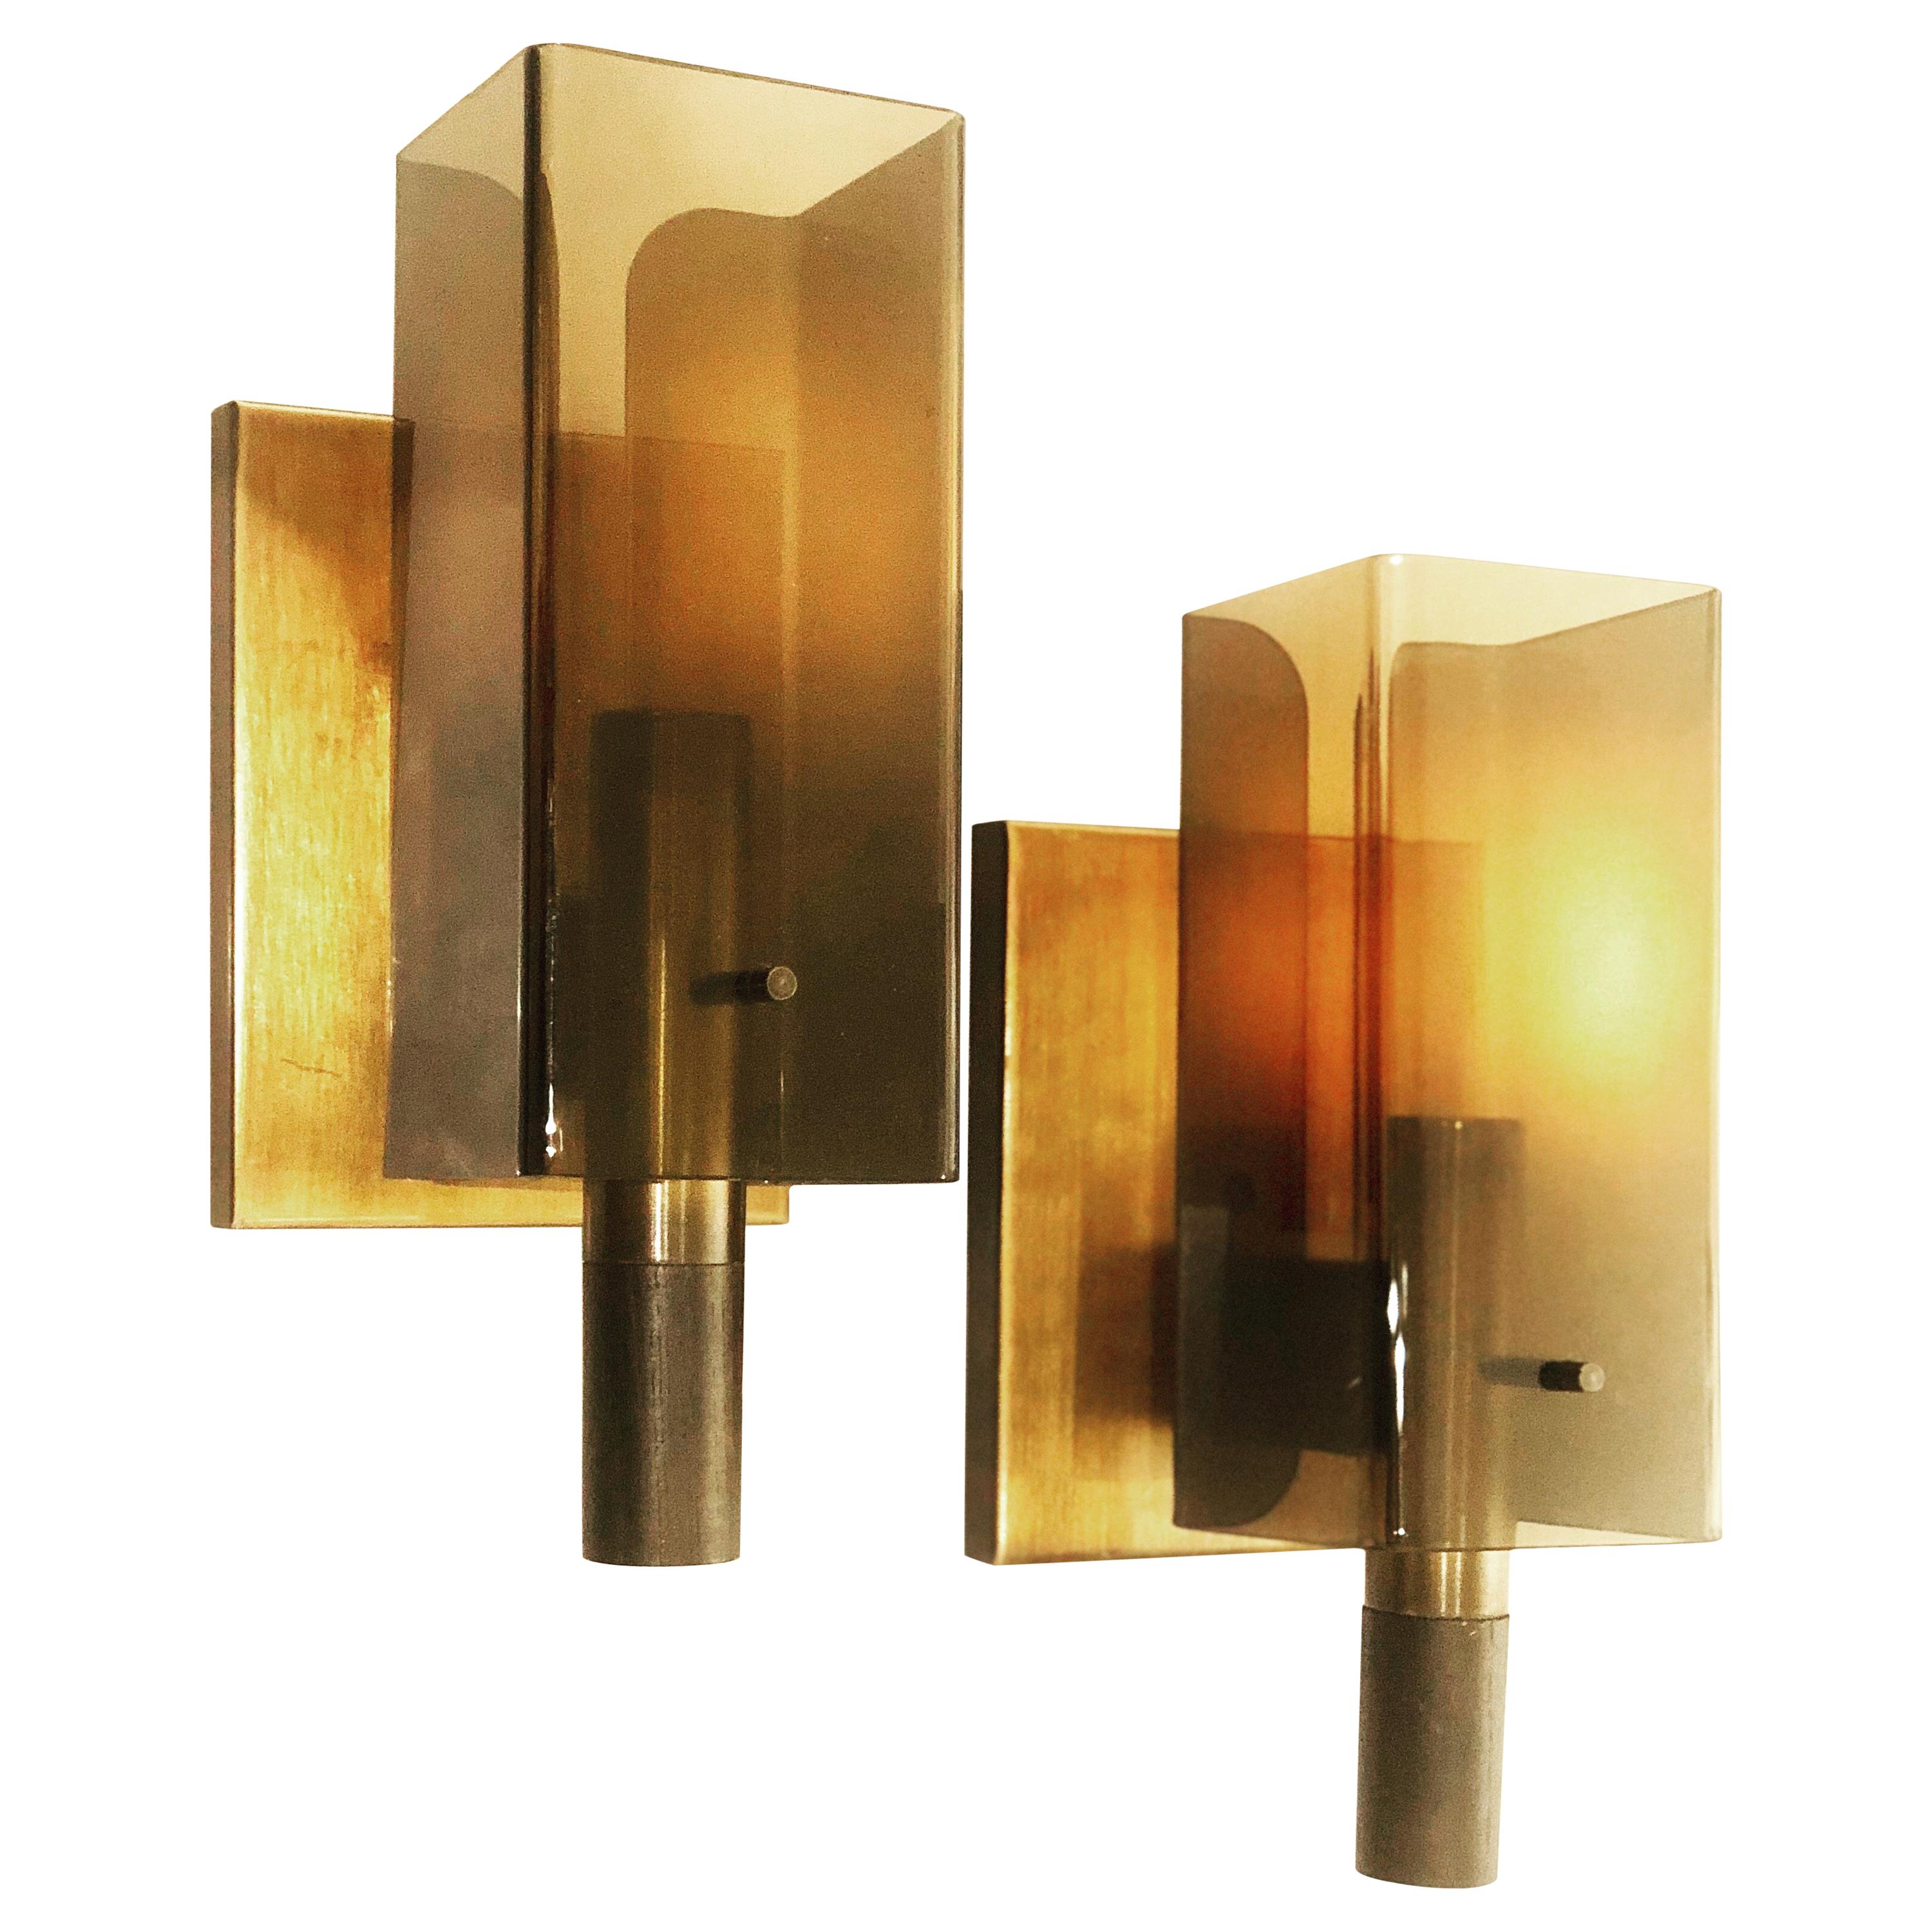 American Space Age Pair of Wall Sconces in Smoke Lucite and Copper